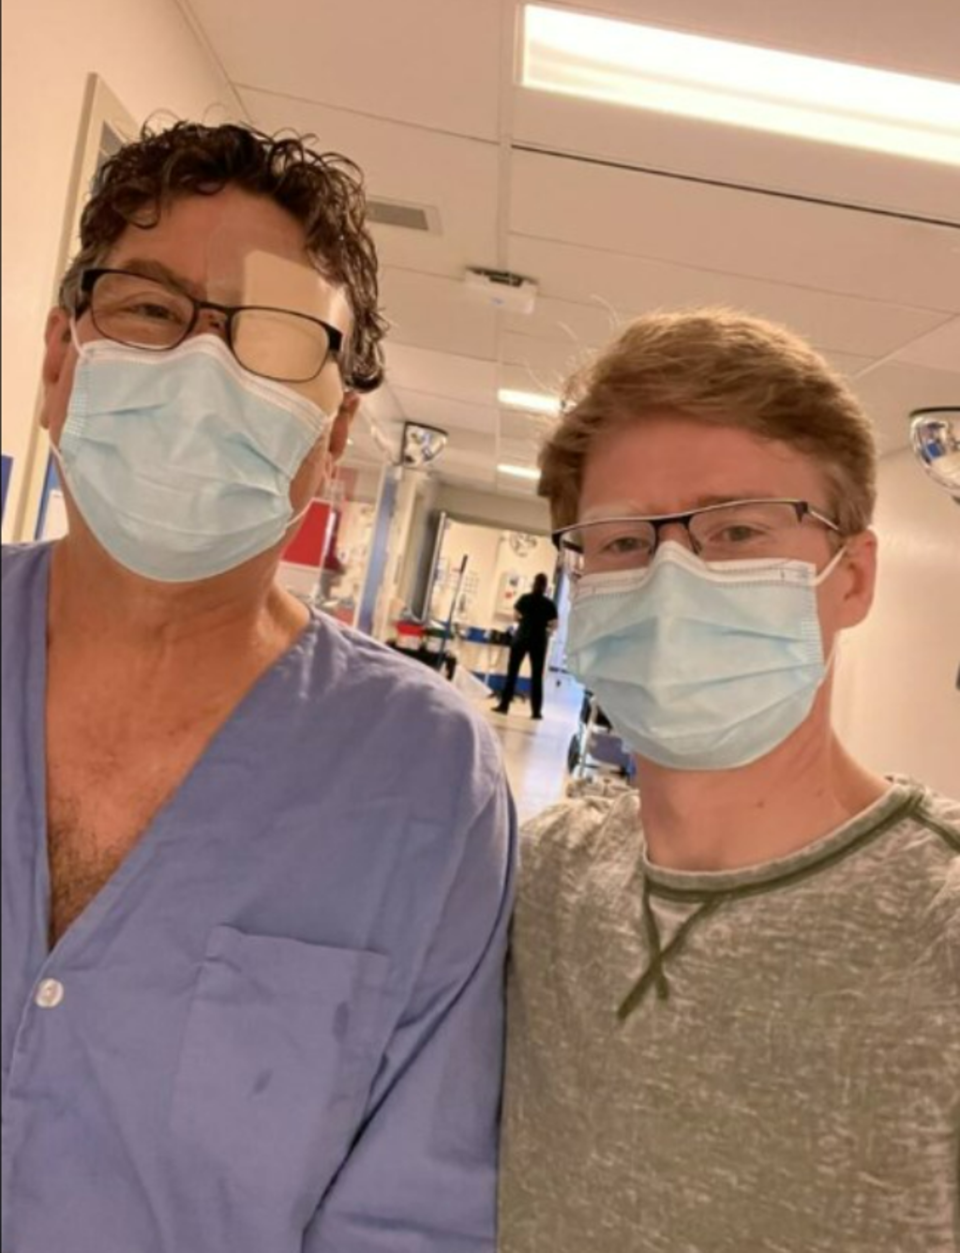 Ed Steinkamp, left, and his son, Bret Steinkamp, right, pose in the hospital together after the terrifying ordeal that saw the 67-year-old lose the use of his eye. (GoFundMe/Bret Steinkamp)